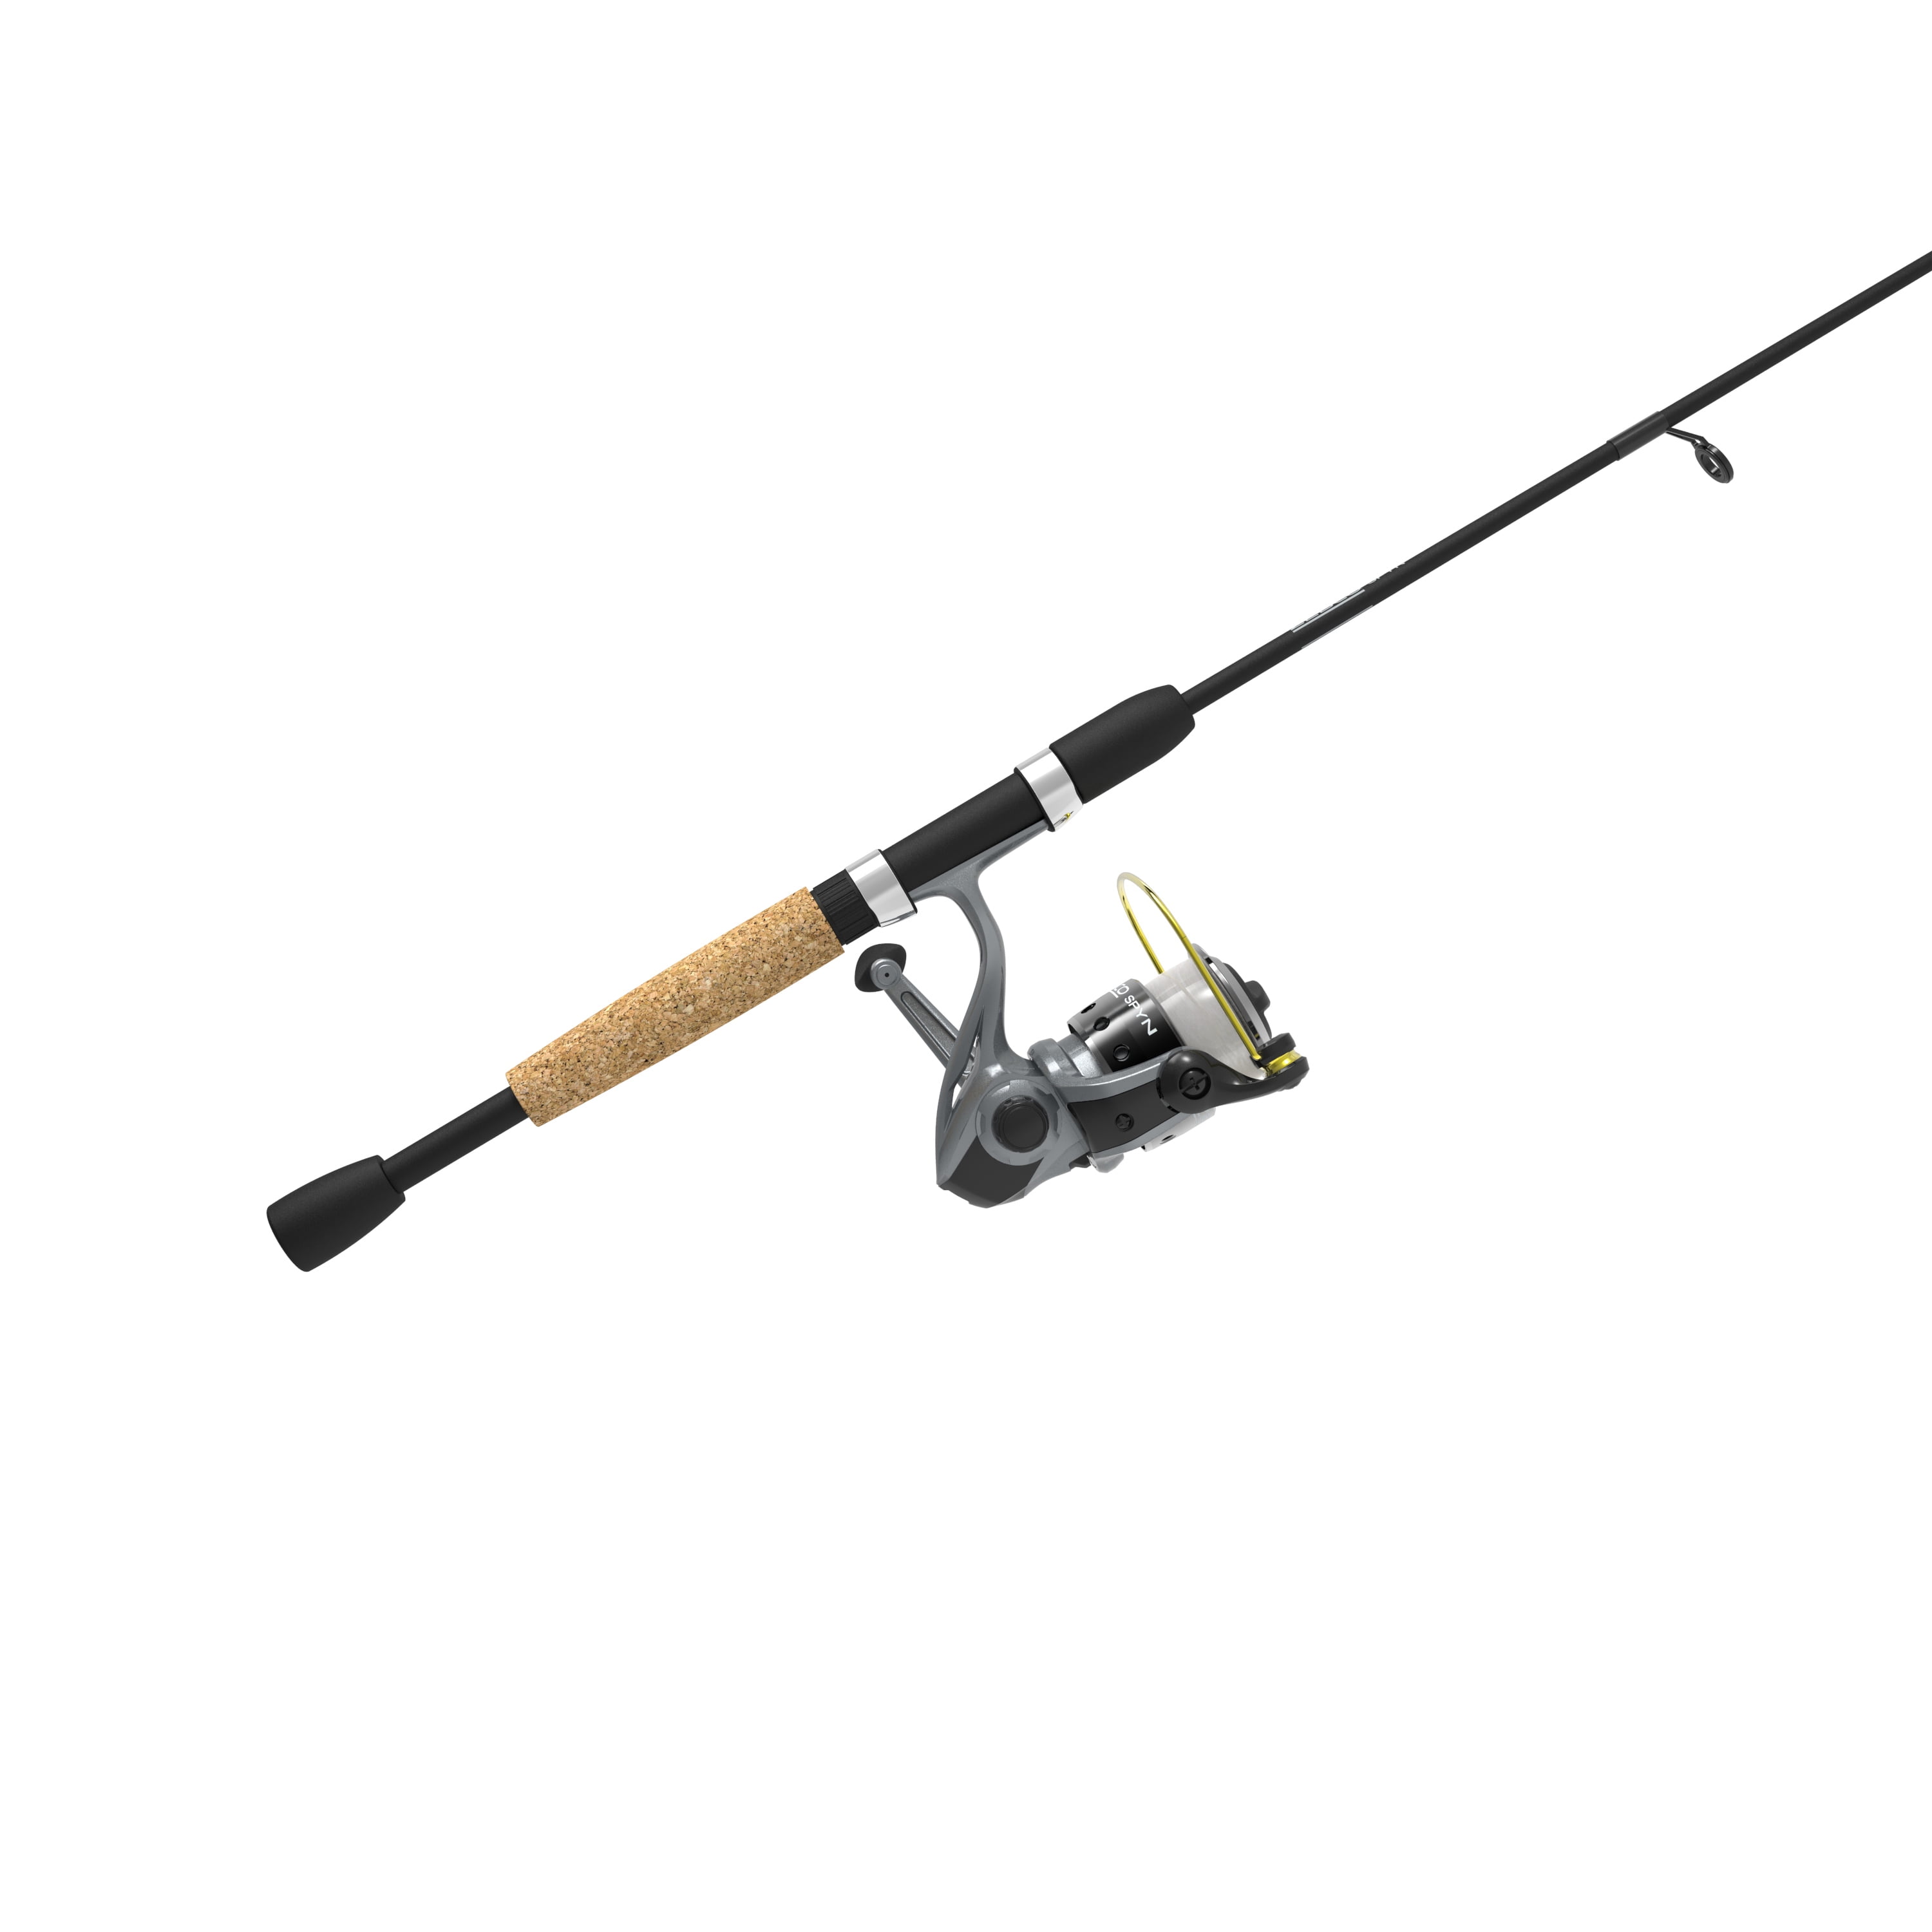 Zebco Spyn Spinning Reel and 2-Piece Fishing Rod Combo, Durable